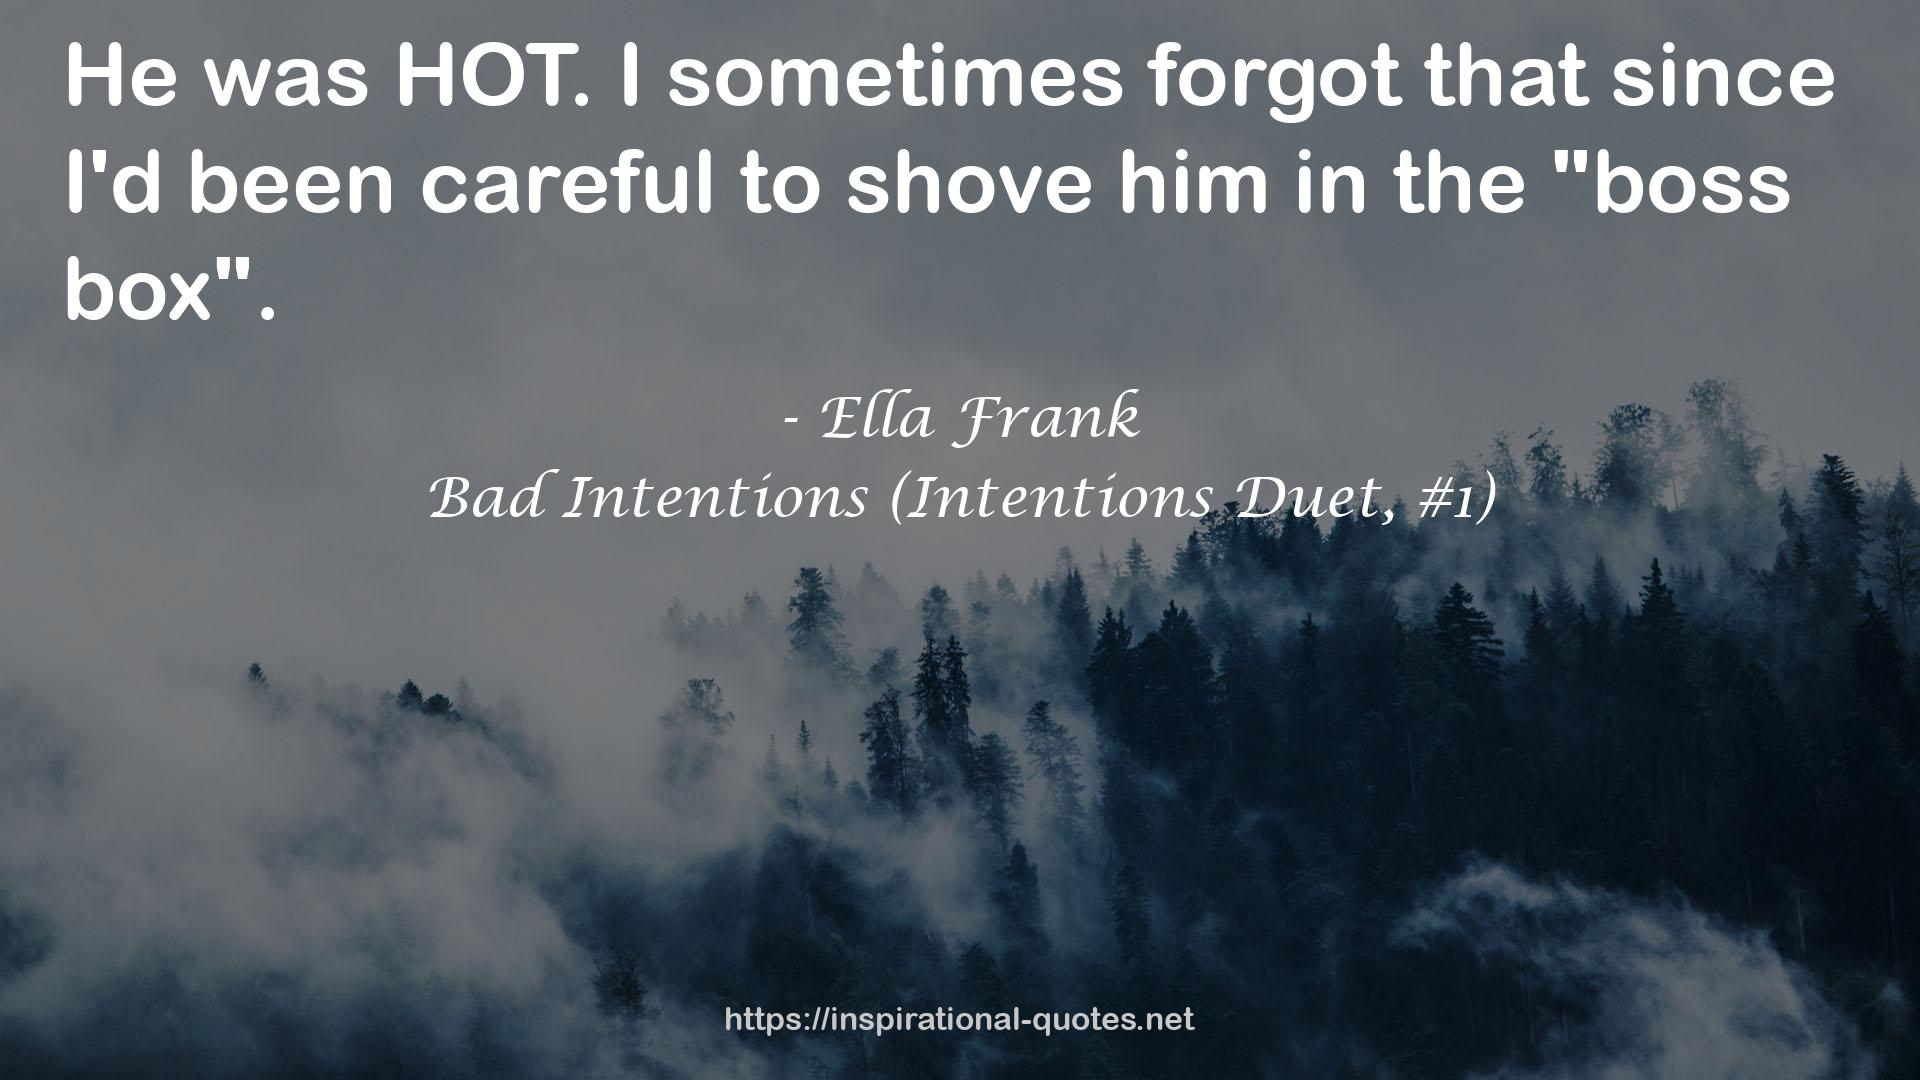 Bad Intentions (Intentions Duet, #1) QUOTES